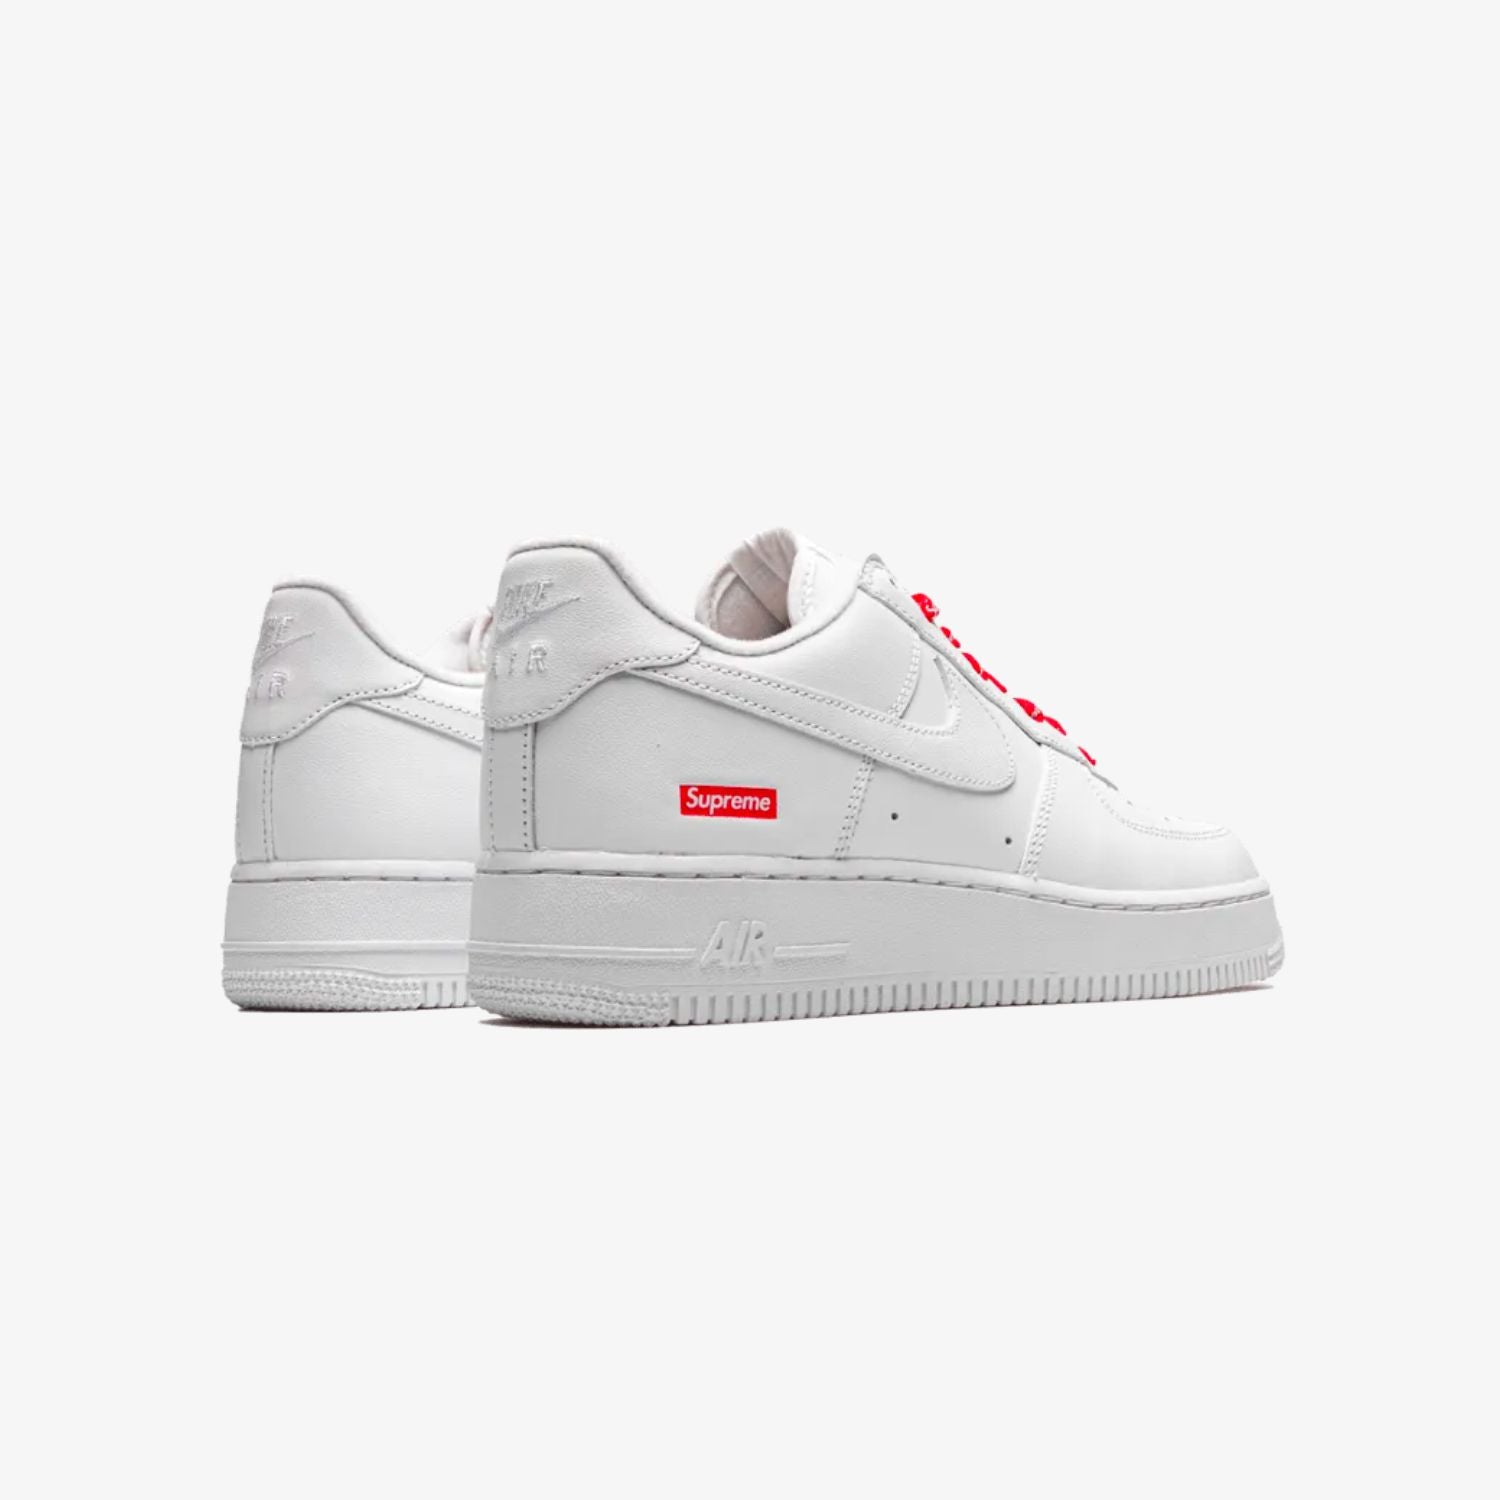 nike-air-force-1-low-supreme-white-unfazed-3